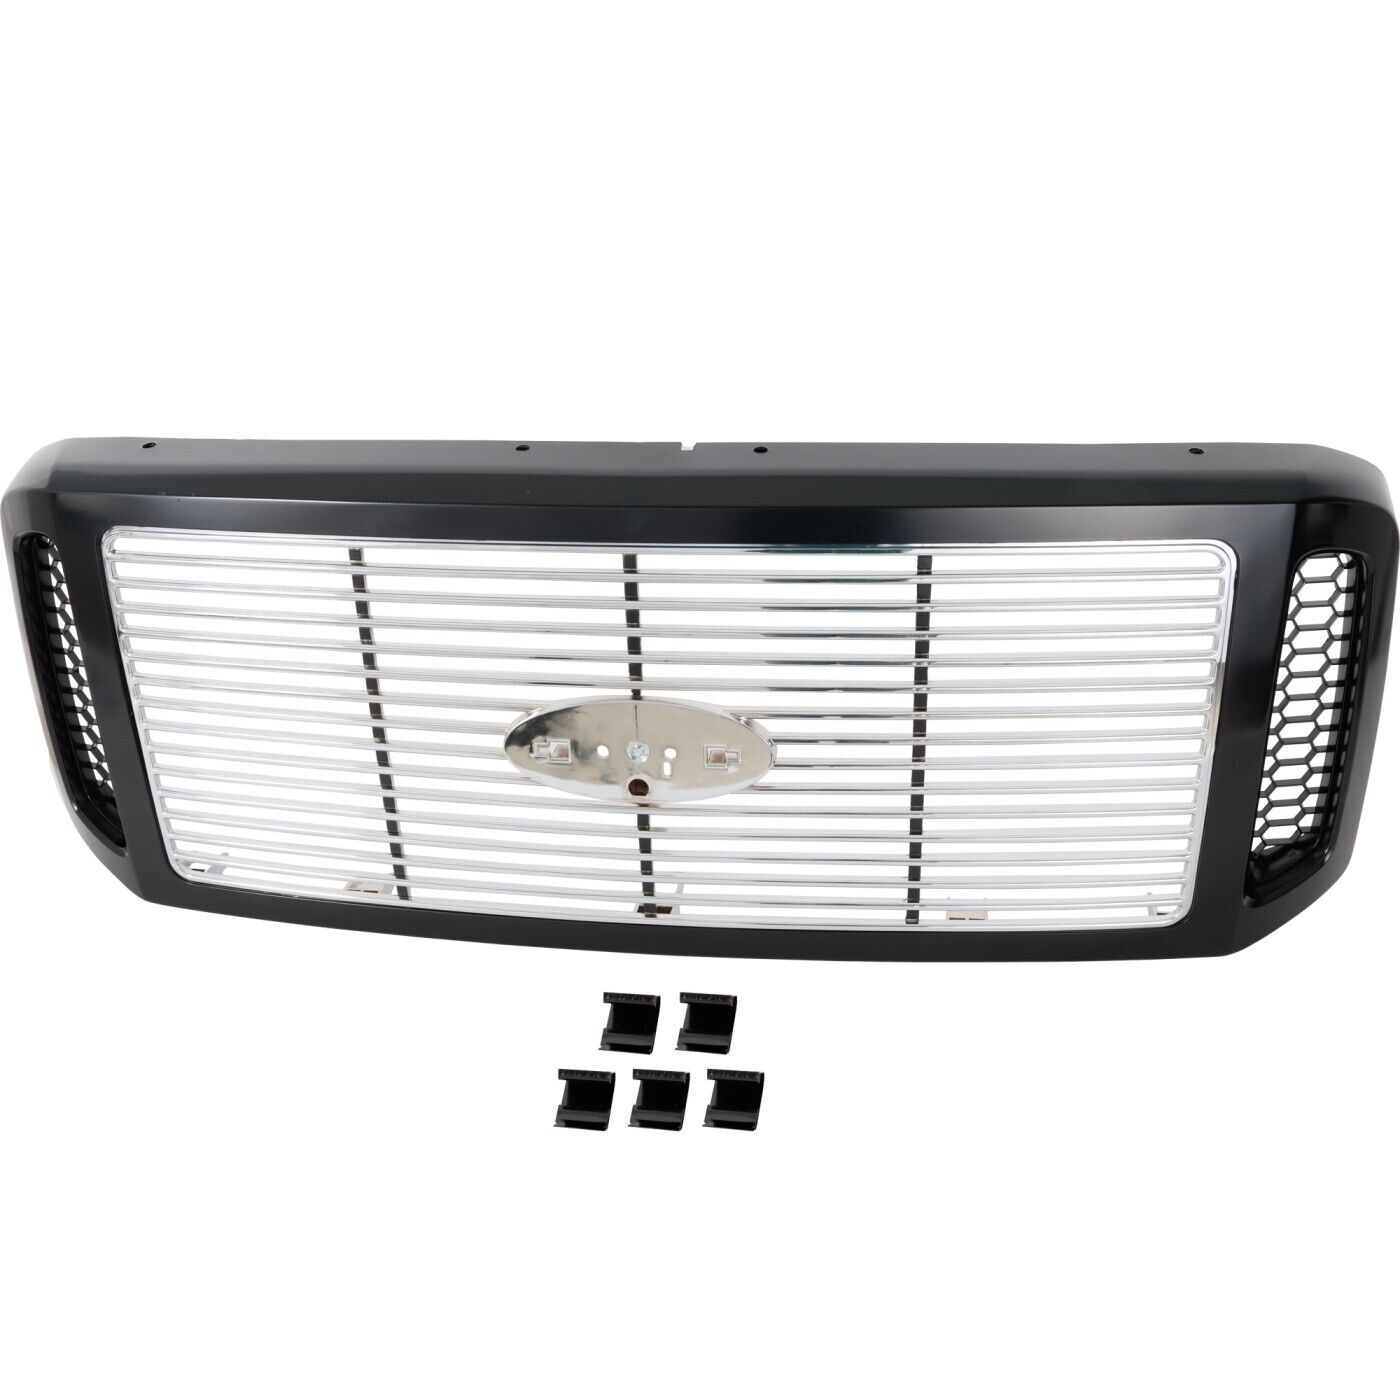 Grille Assembly For 2005-2007 Ford F-250 Super Duty F-350 F-450 Chrome Insert